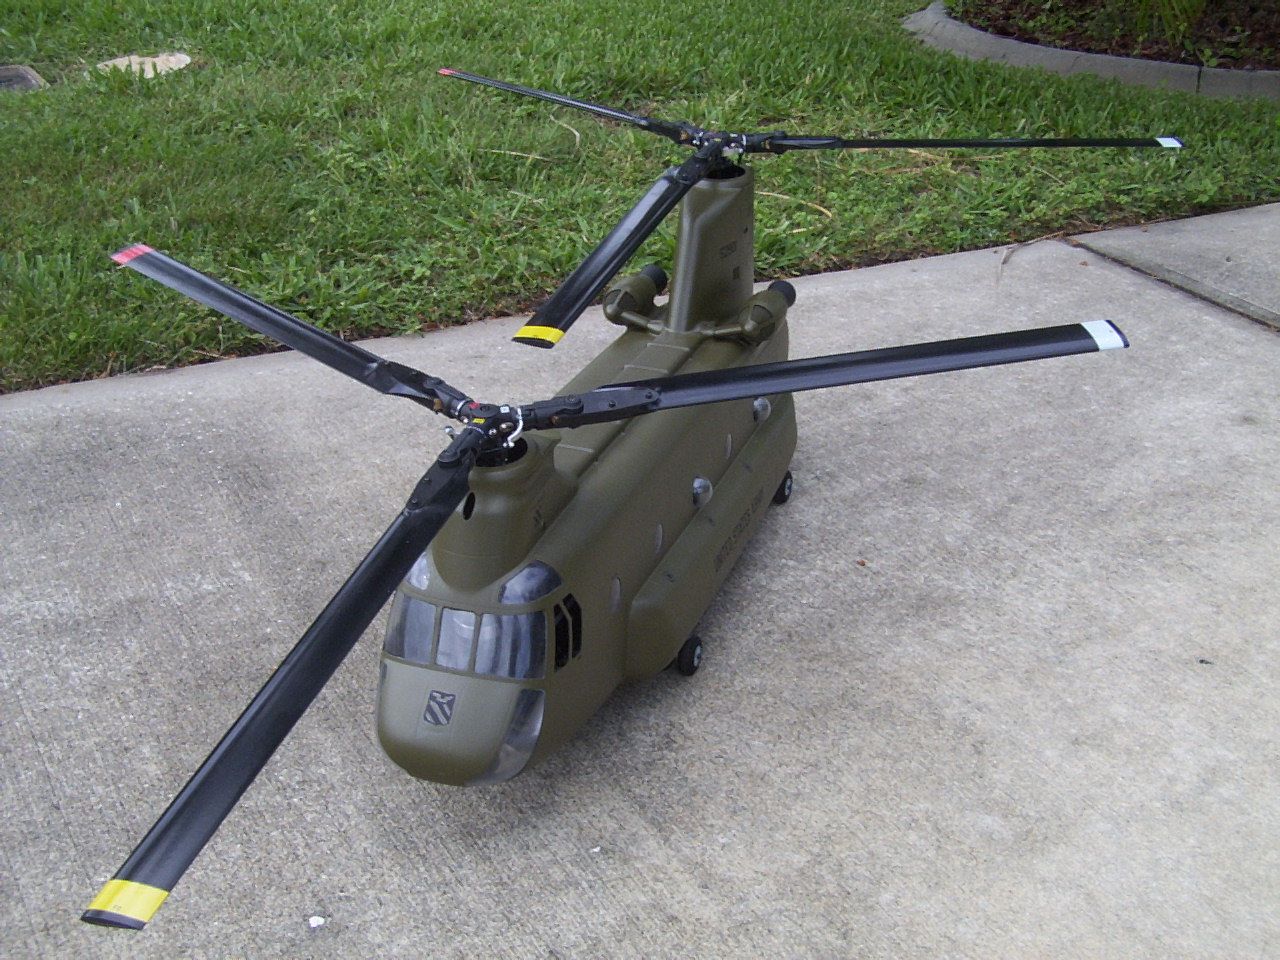 rc chinook helicopter for sale